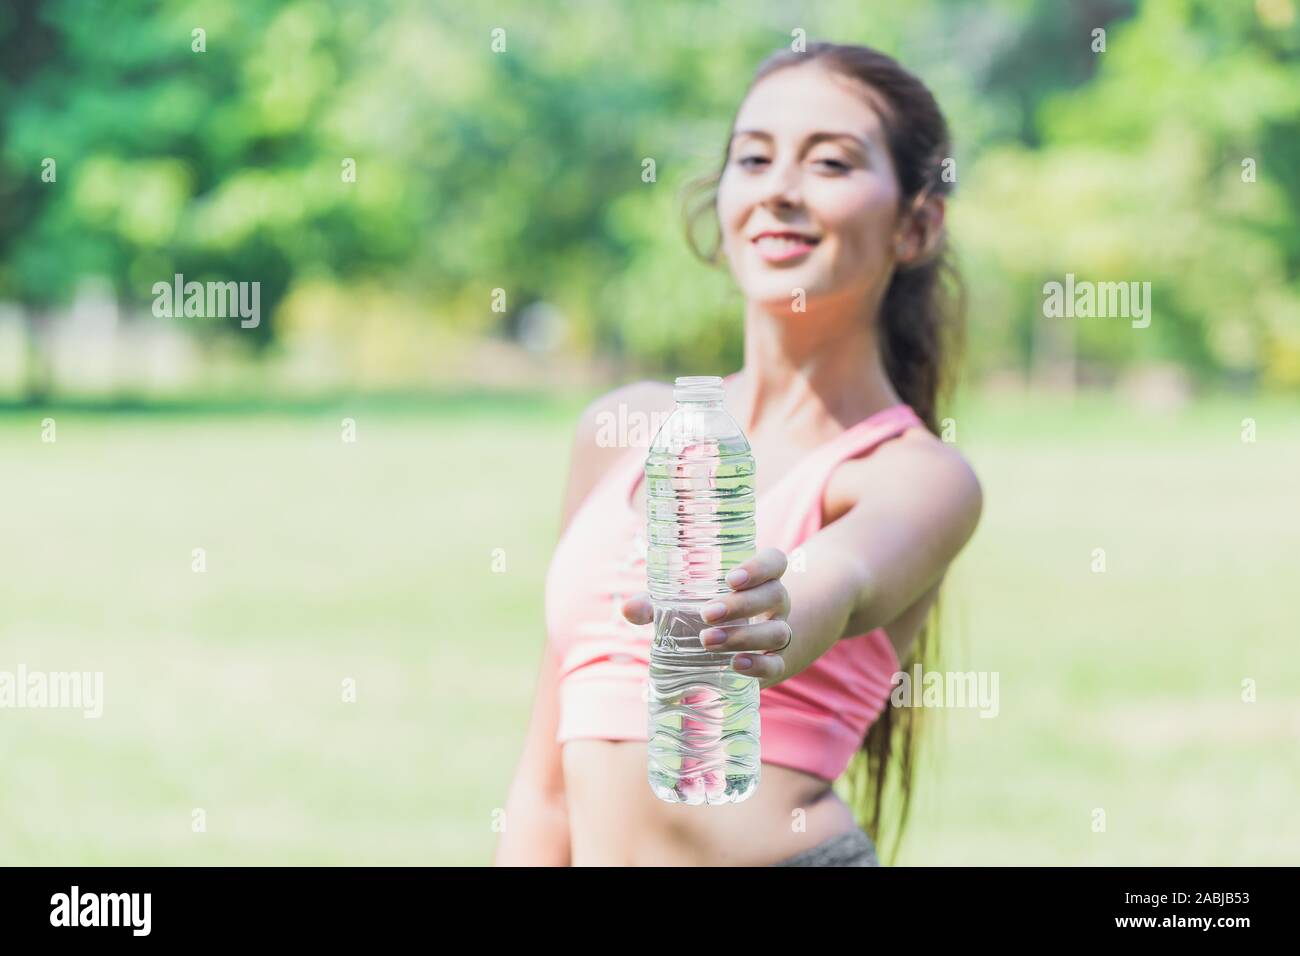 sport women hand show drinking water bottle for recommend to drink clean water for good healthy life. Stock Photo